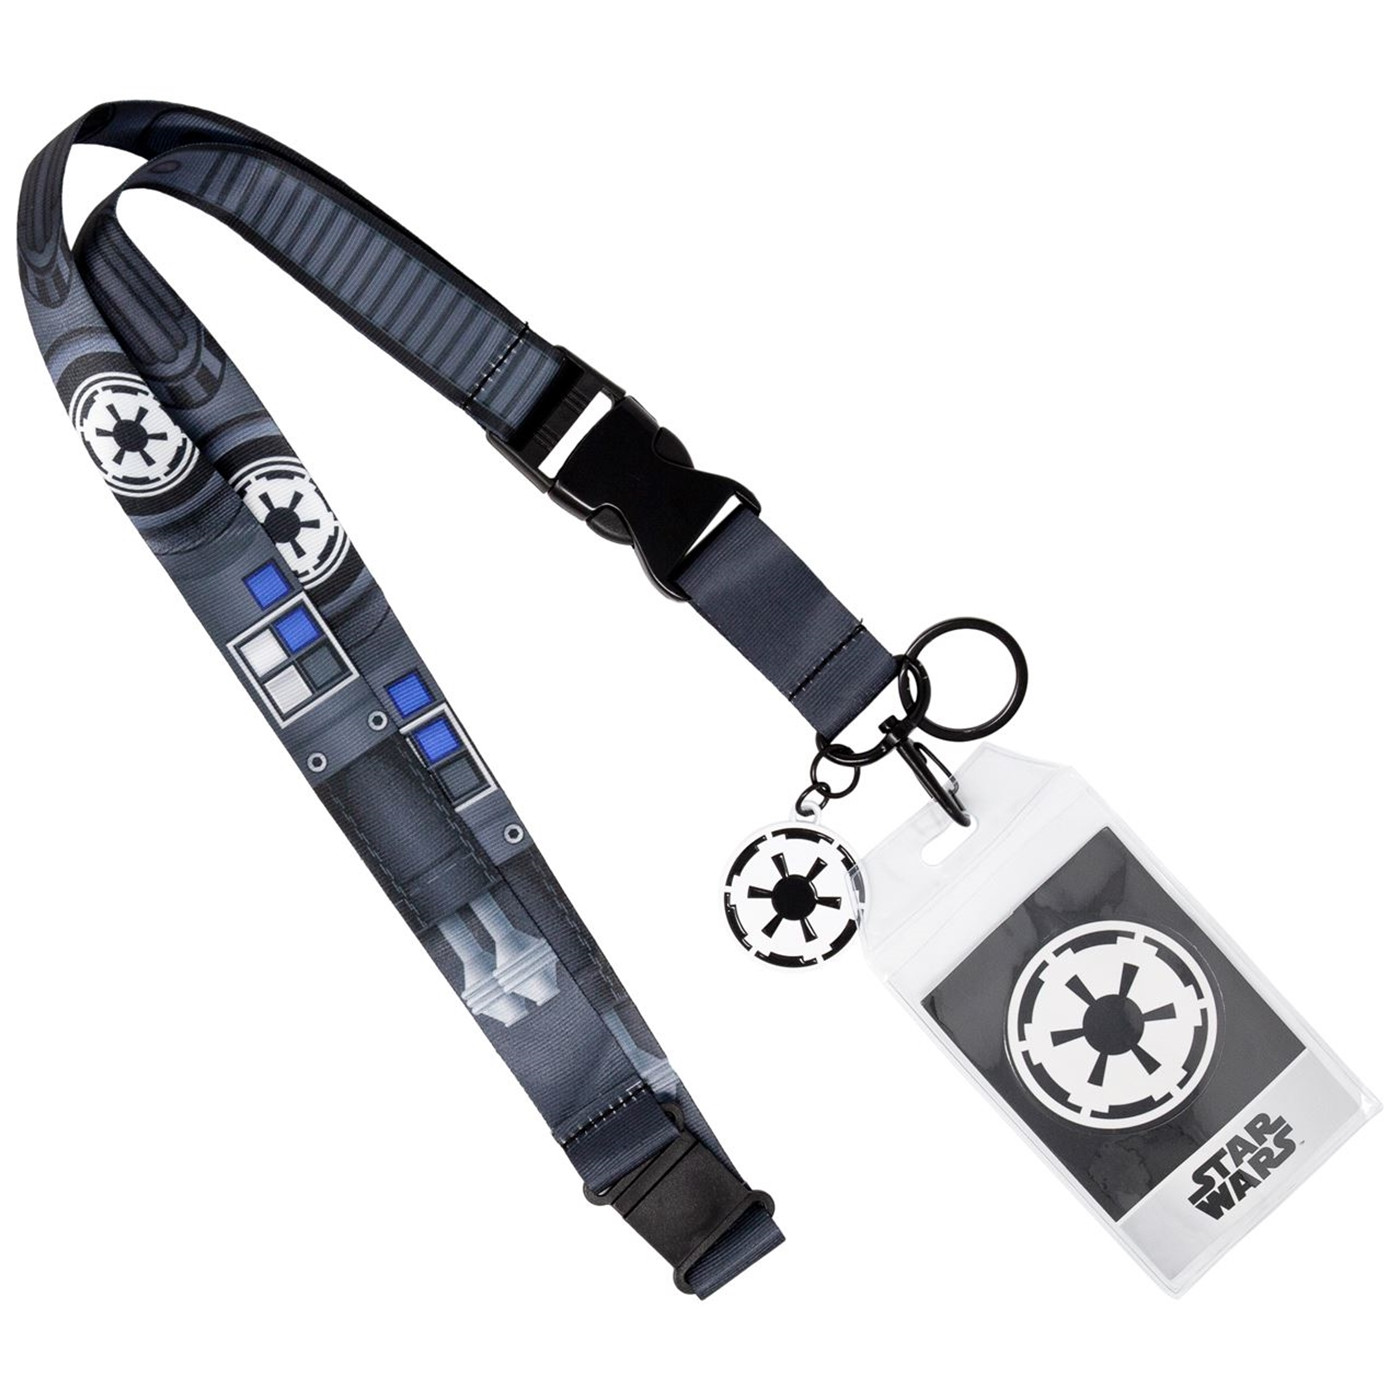 Heroes and Villains Tie Fighter Suit Up Lanyard